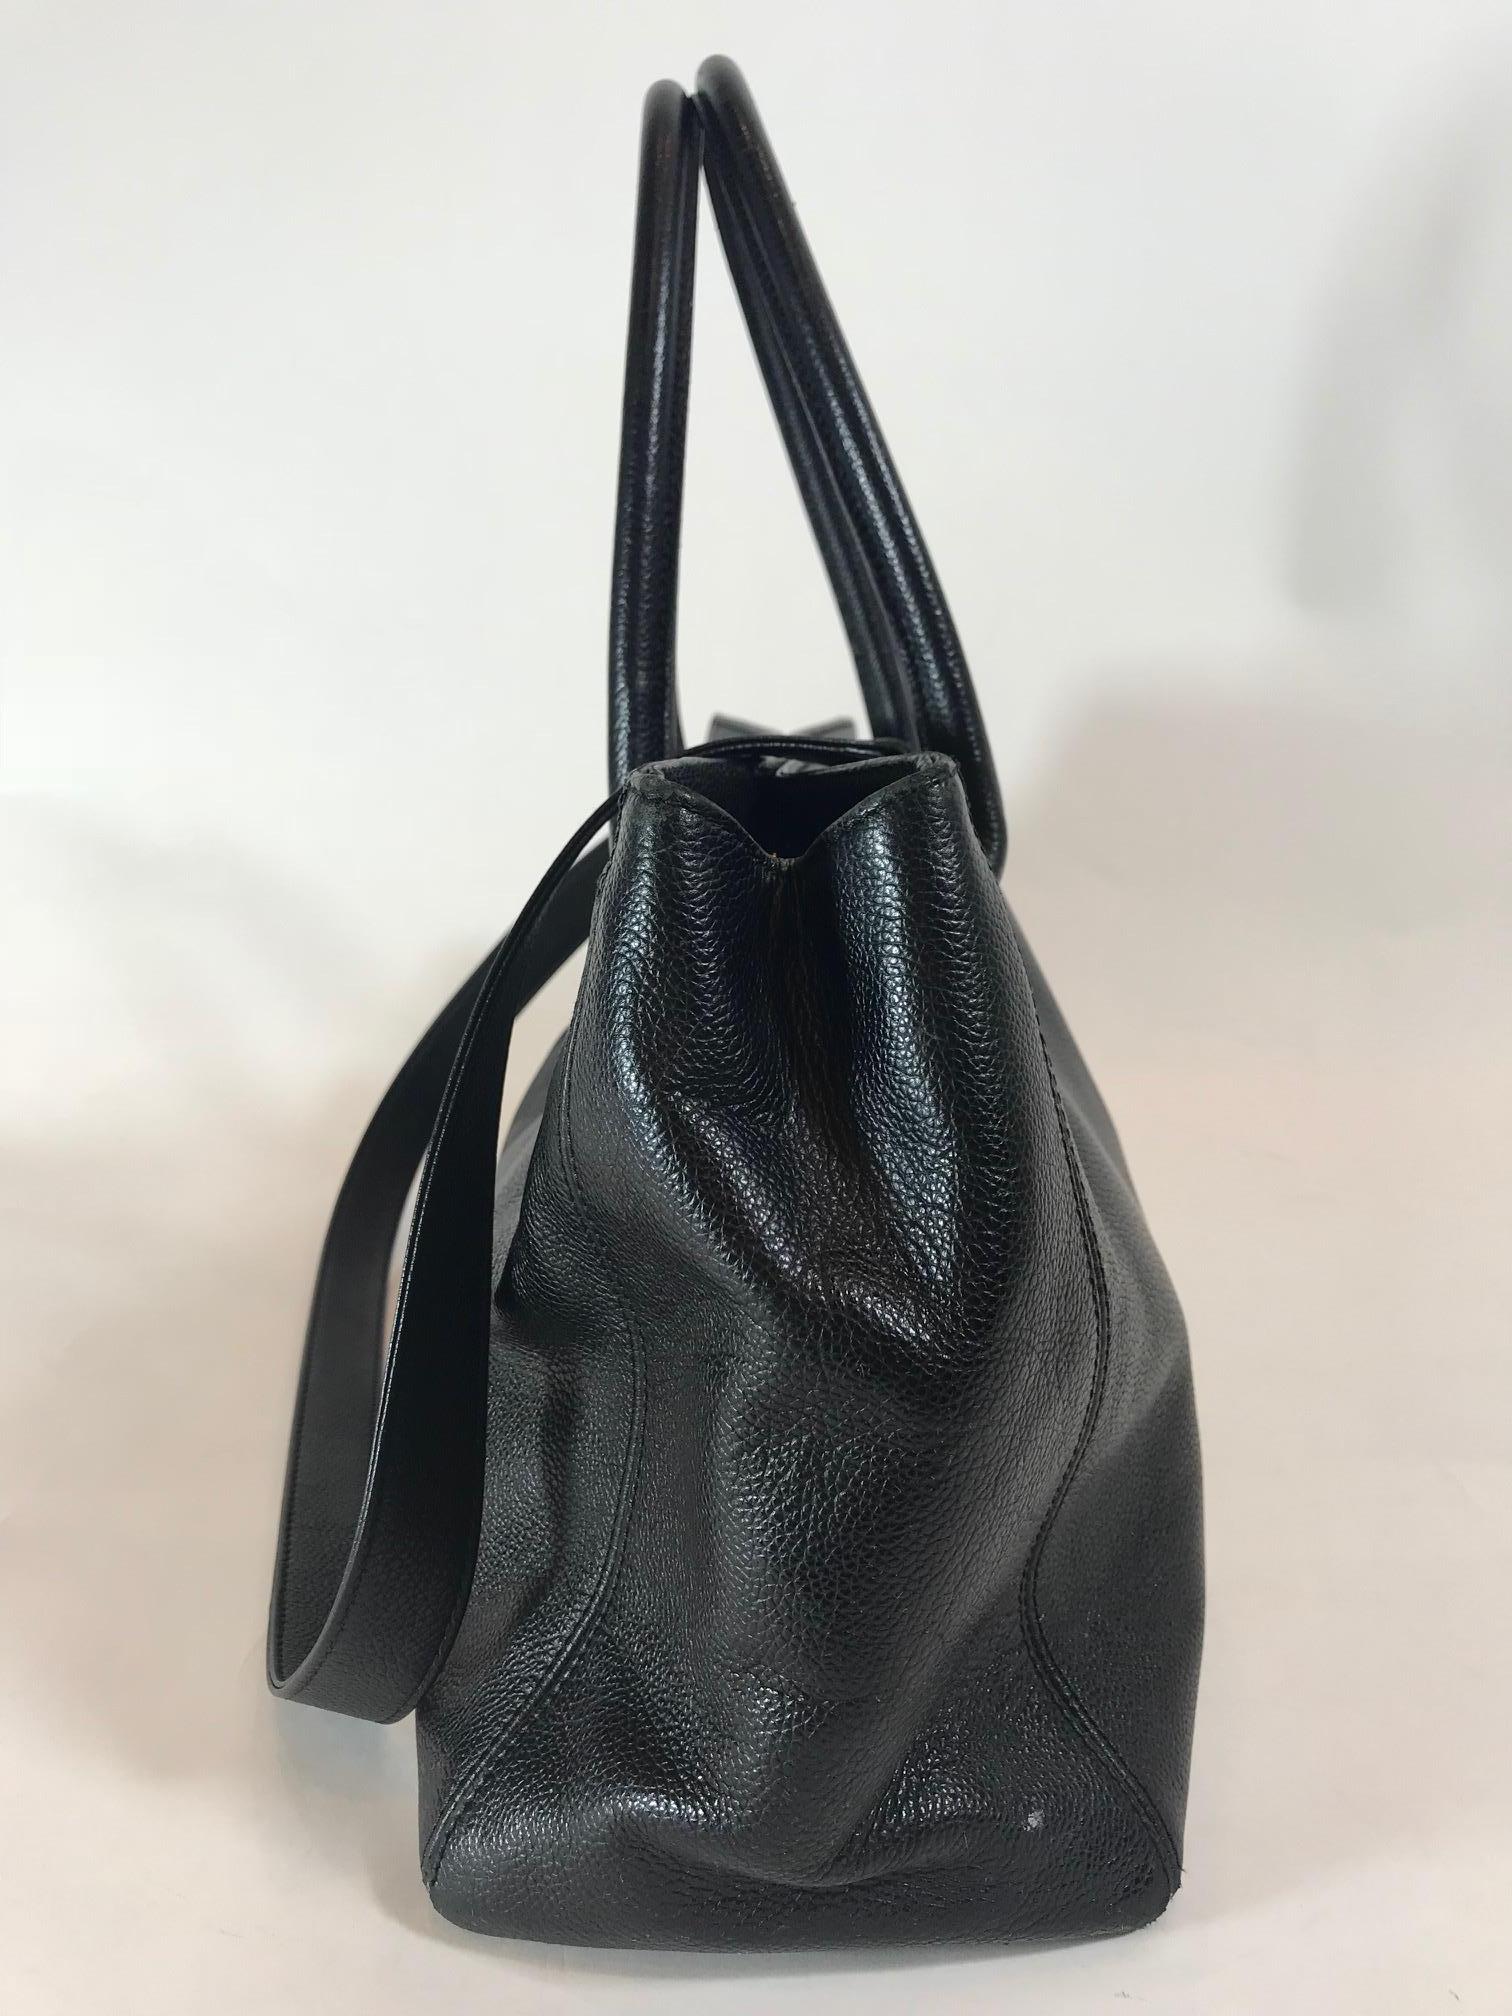 Chanel Cerf Tote w/ Strap In Good Condition For Sale In Roslyn, NY